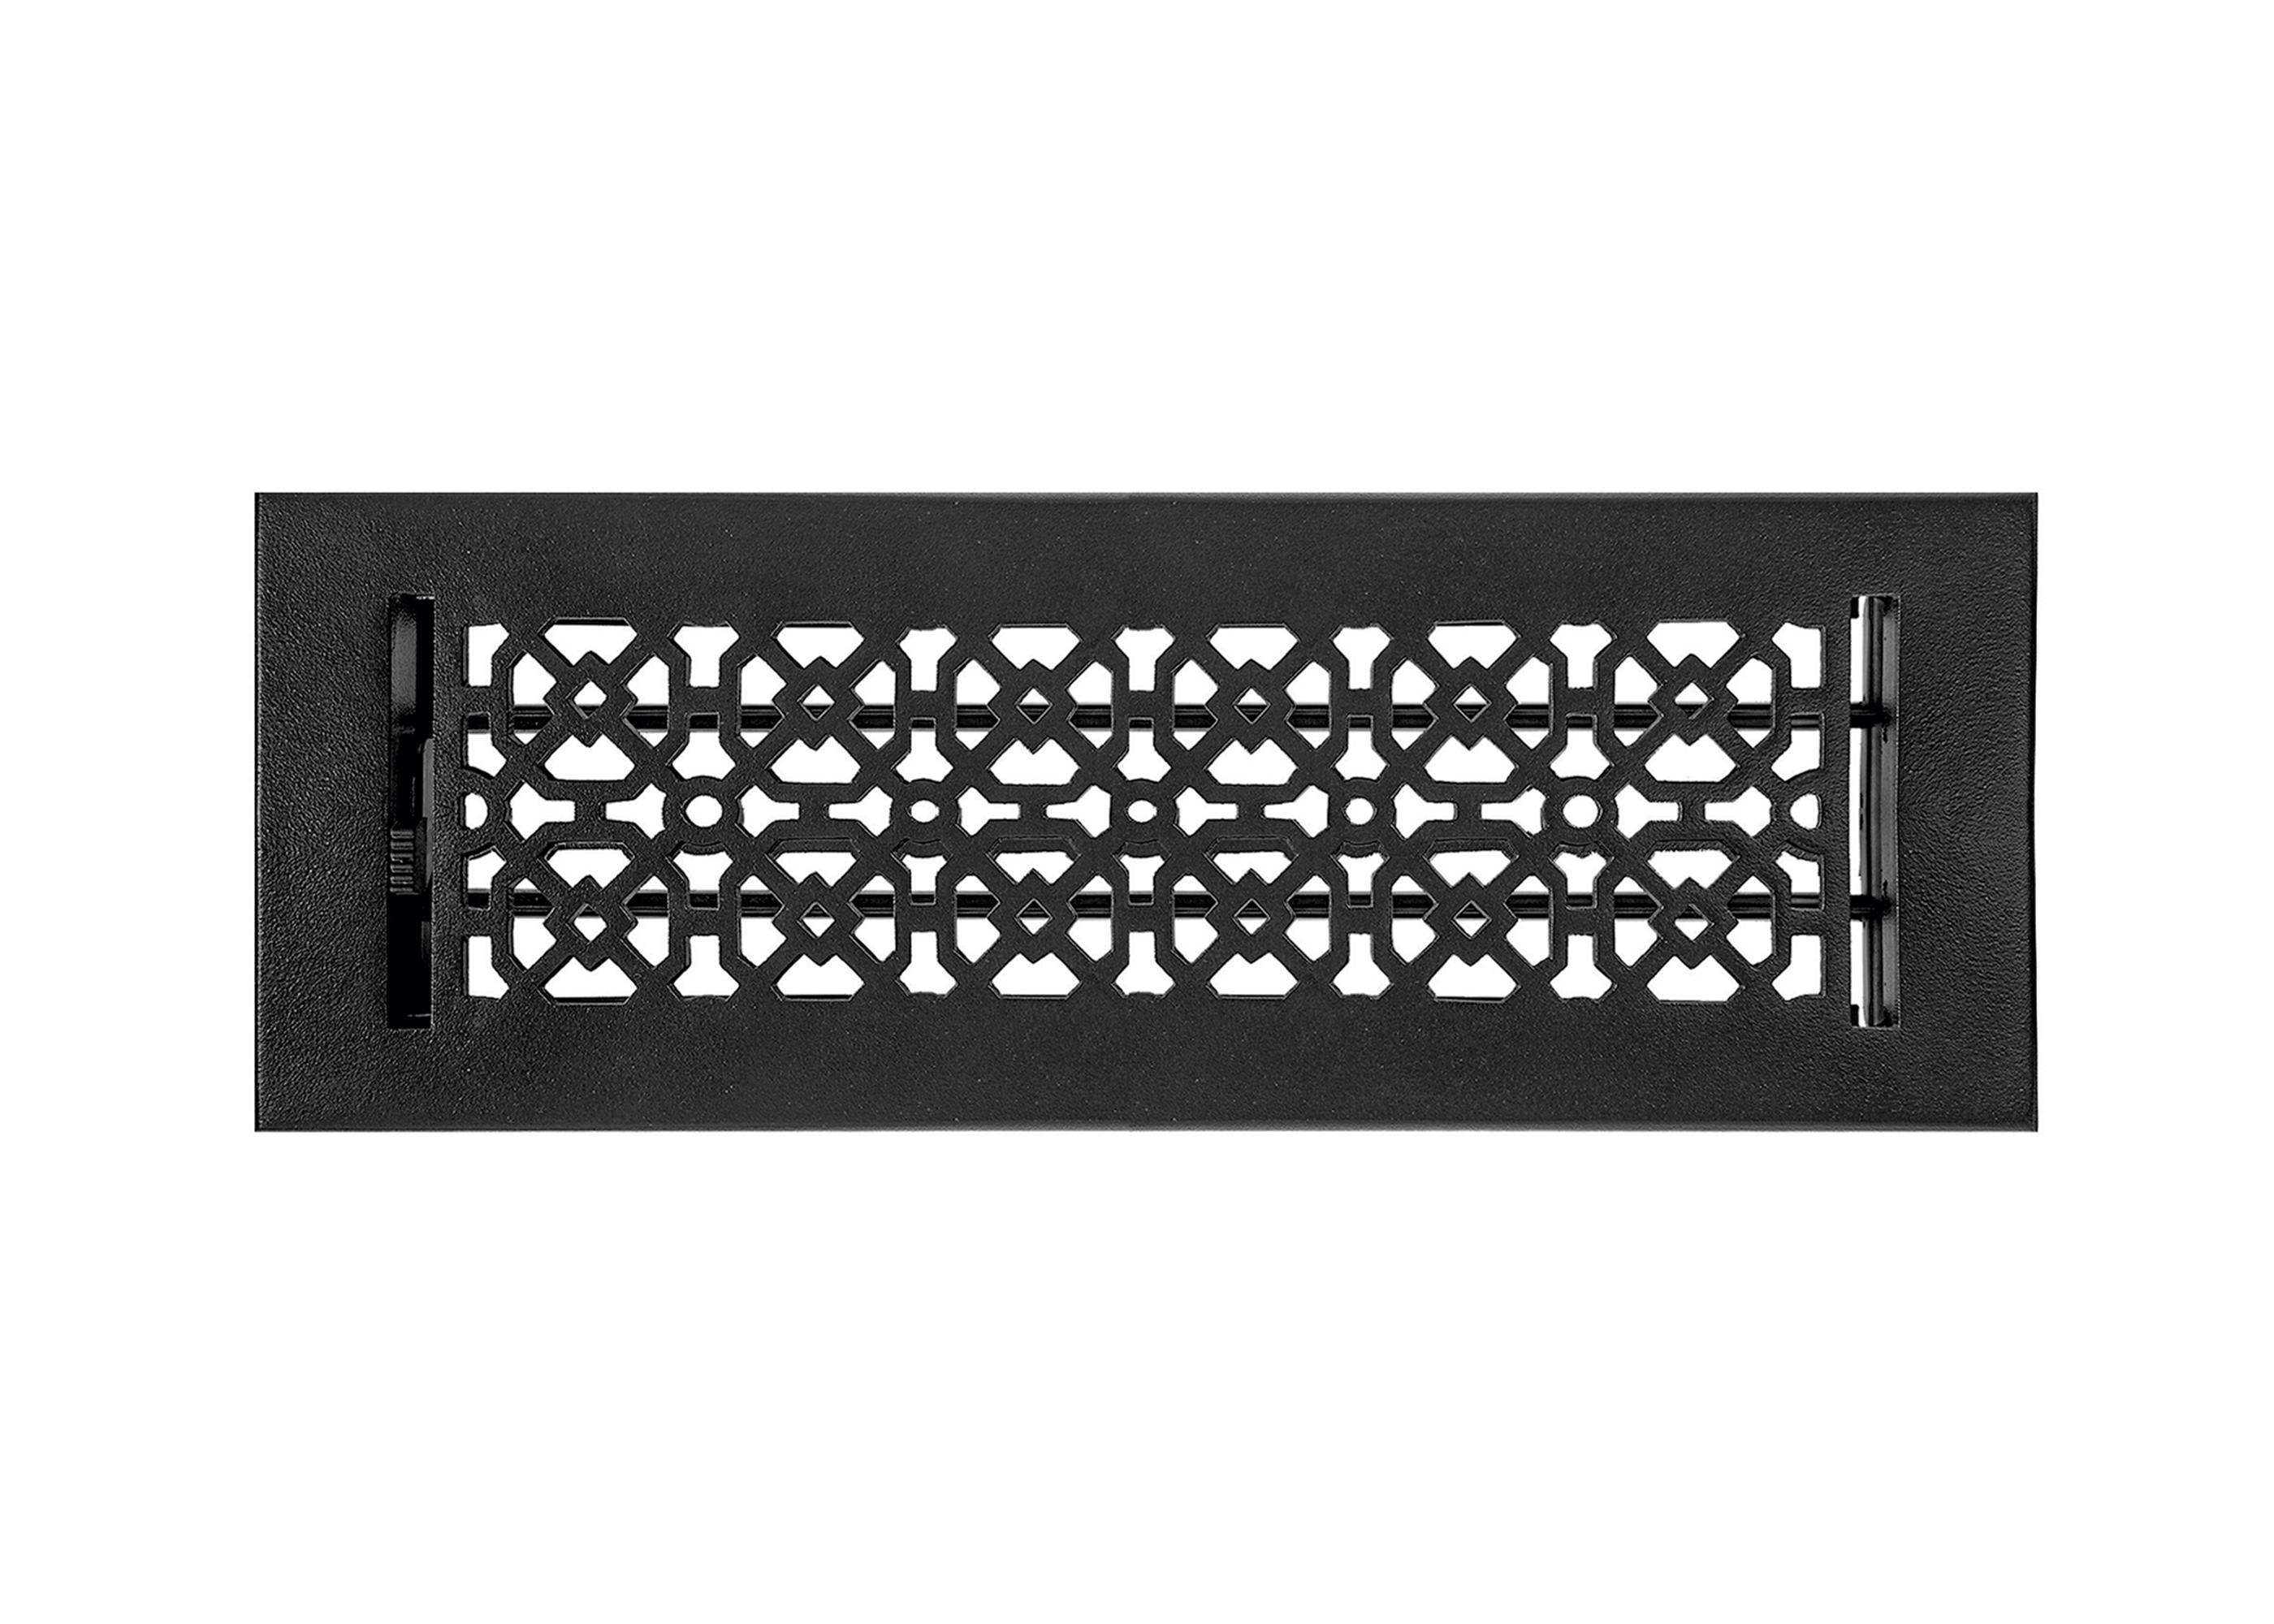 Achtek Air Supply Vent 4"x 14" Duct Opening (Overall 5-1/2"x 15-3/4") Solid Cast Aluminium Register Cover | Powder Coated